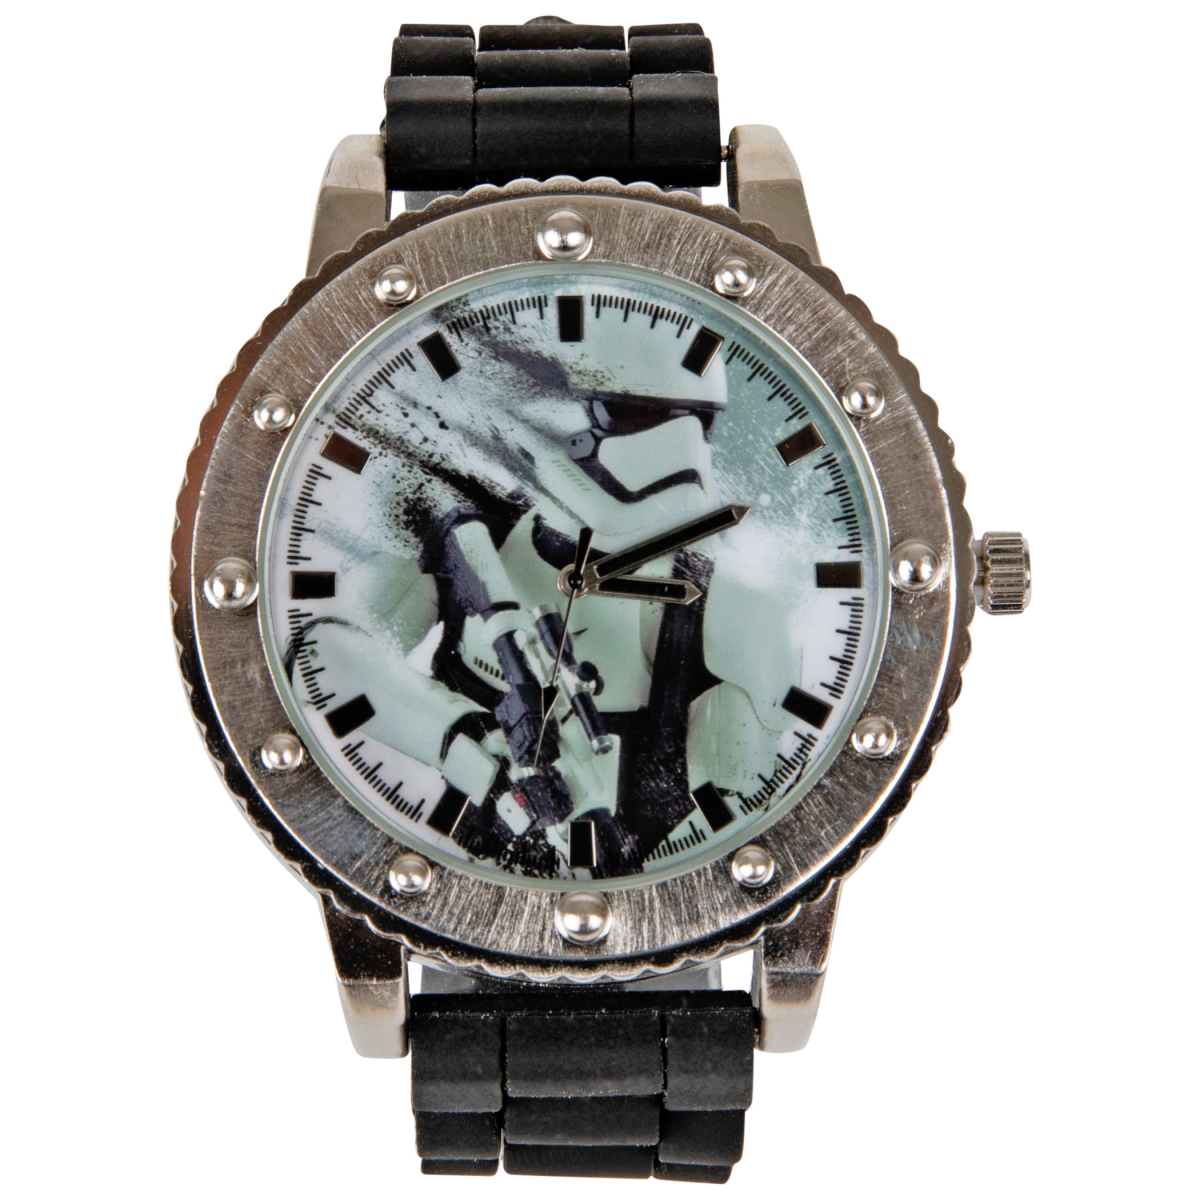 Picture of Star Wars 855427 Star Wars the Force Awakens Stormtroopers Chronograph Watch